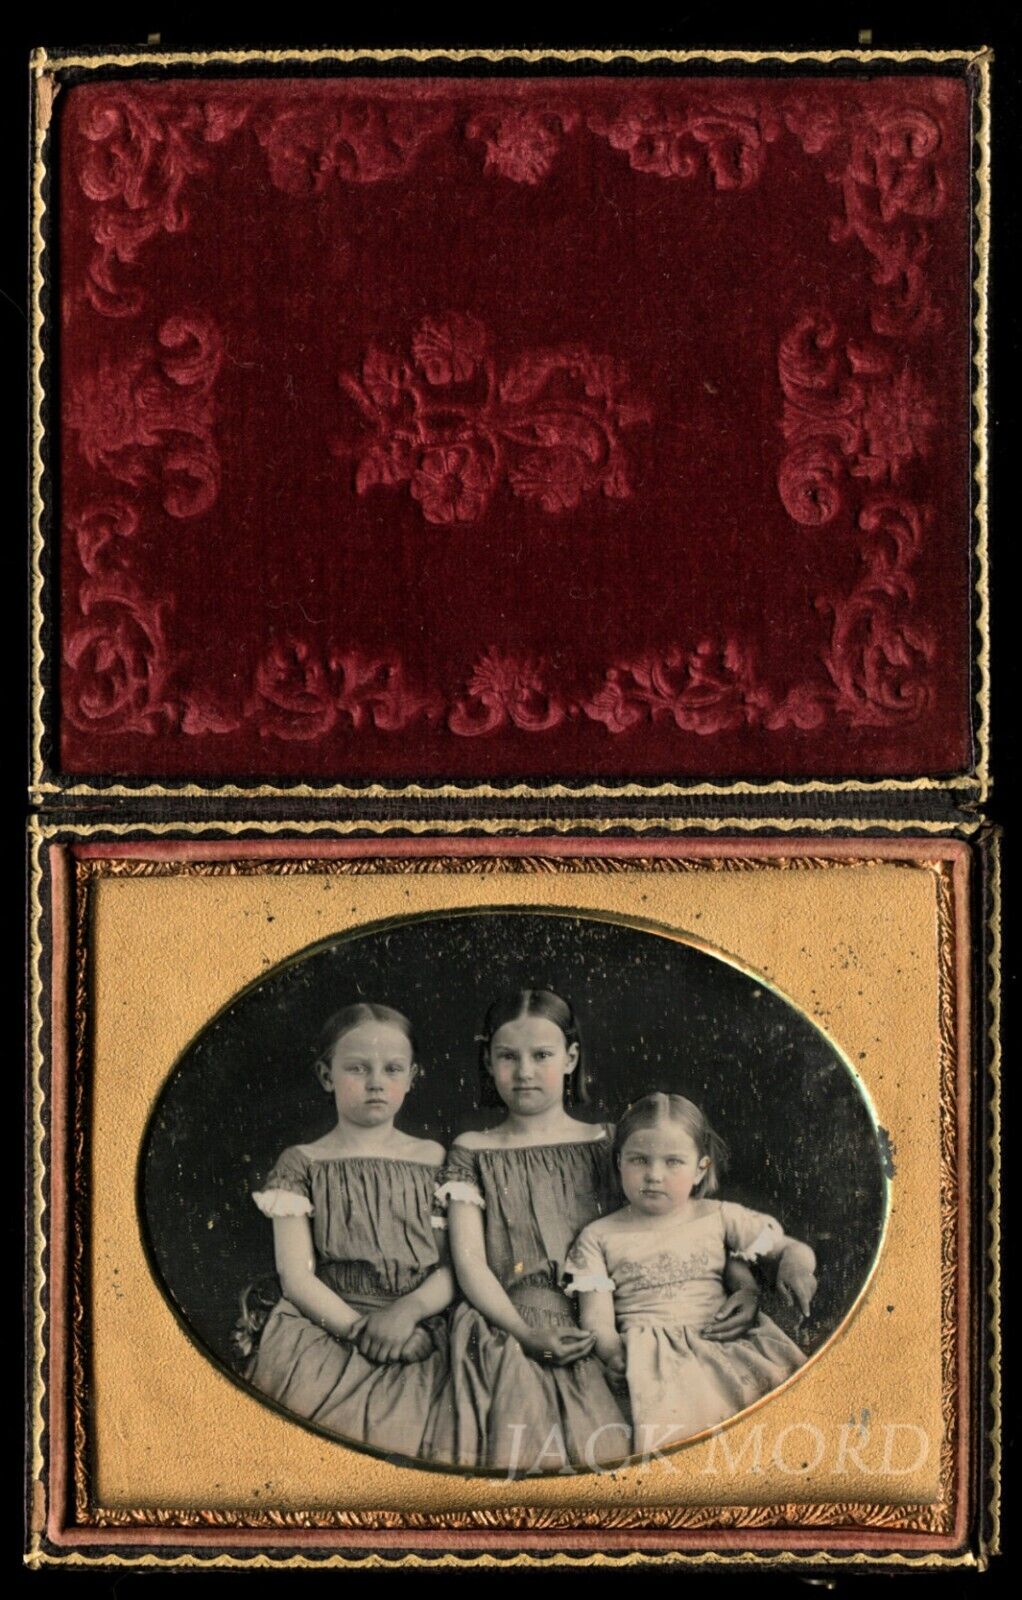 Beautiful 1/4 Daguerreotype ~ Sisters Holding Hands - Matching Dresses Tinted